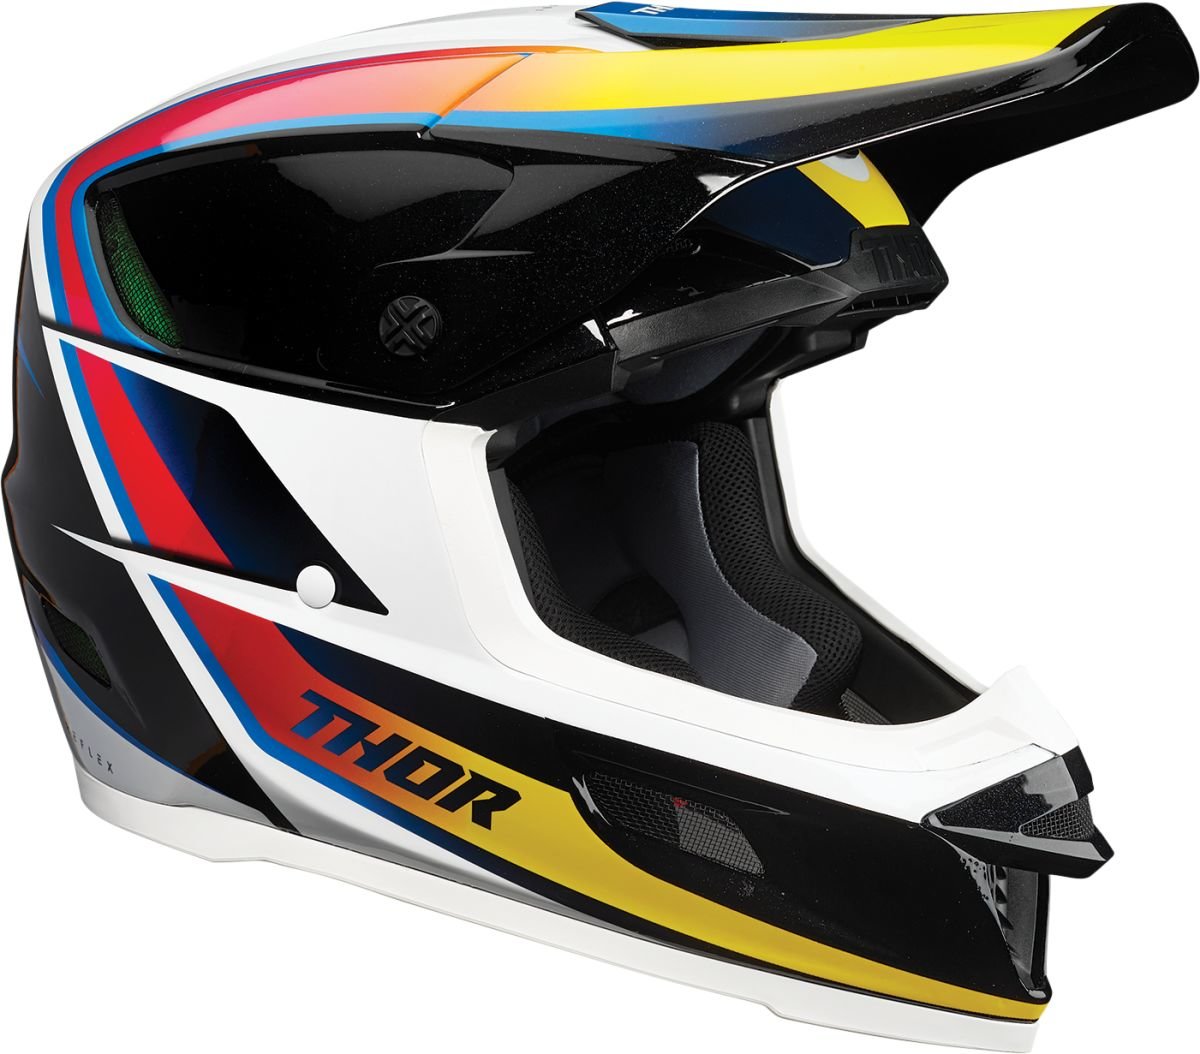 Thor Reflex Accel Mips Helm Multi Color